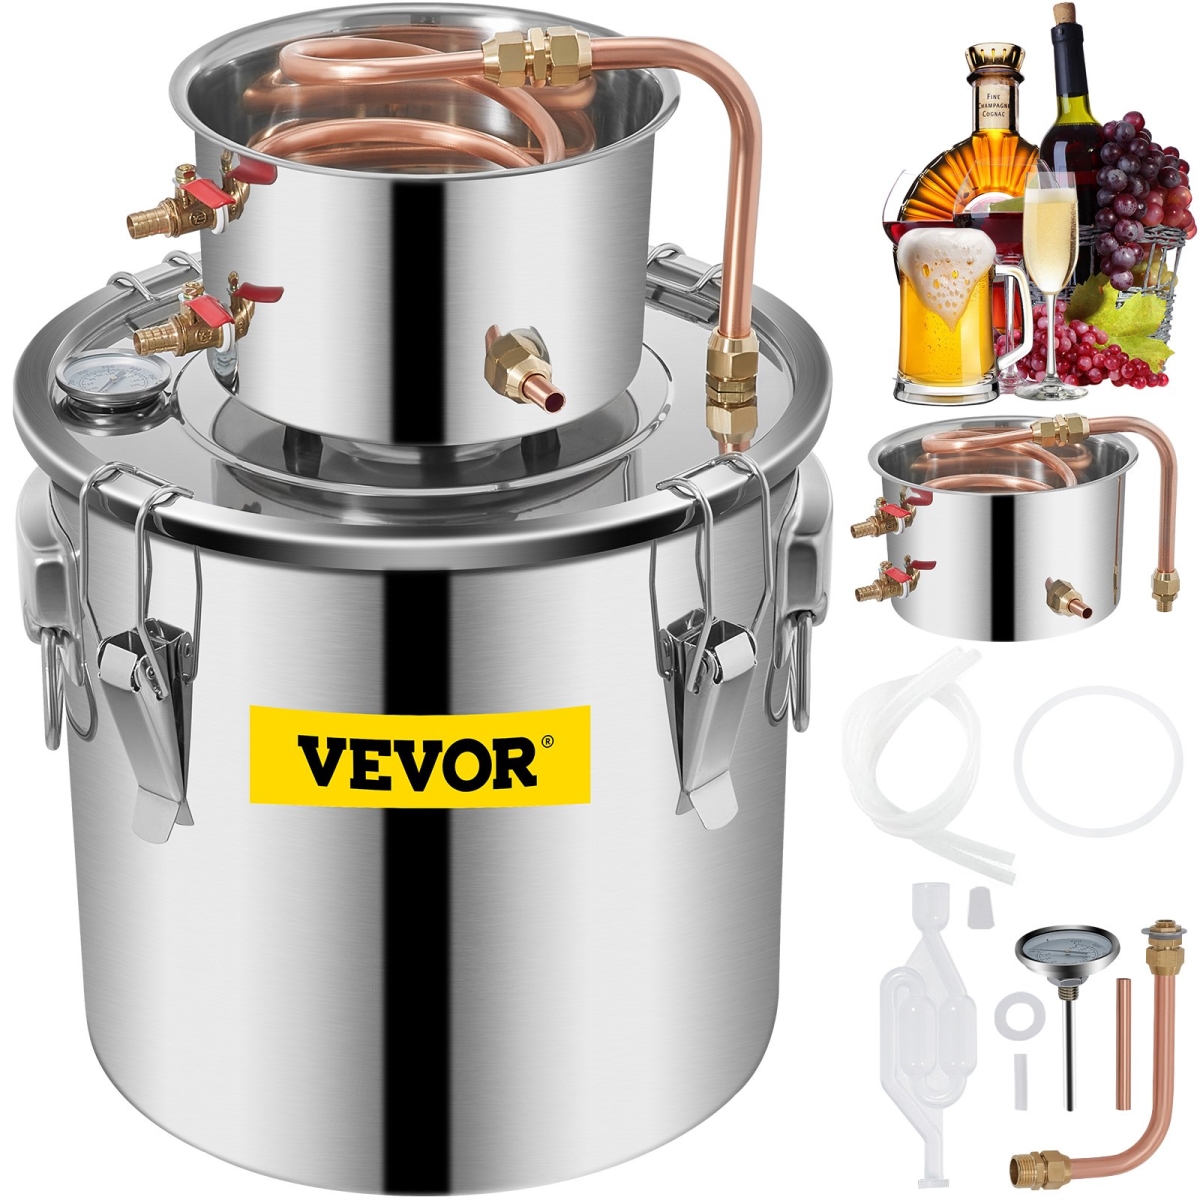 Picture of Vevor ZLSJ5GALZLQ000001V0 5 gal 21 Liter Stainless Steel Water Alcohol Distiller with Copper Tube